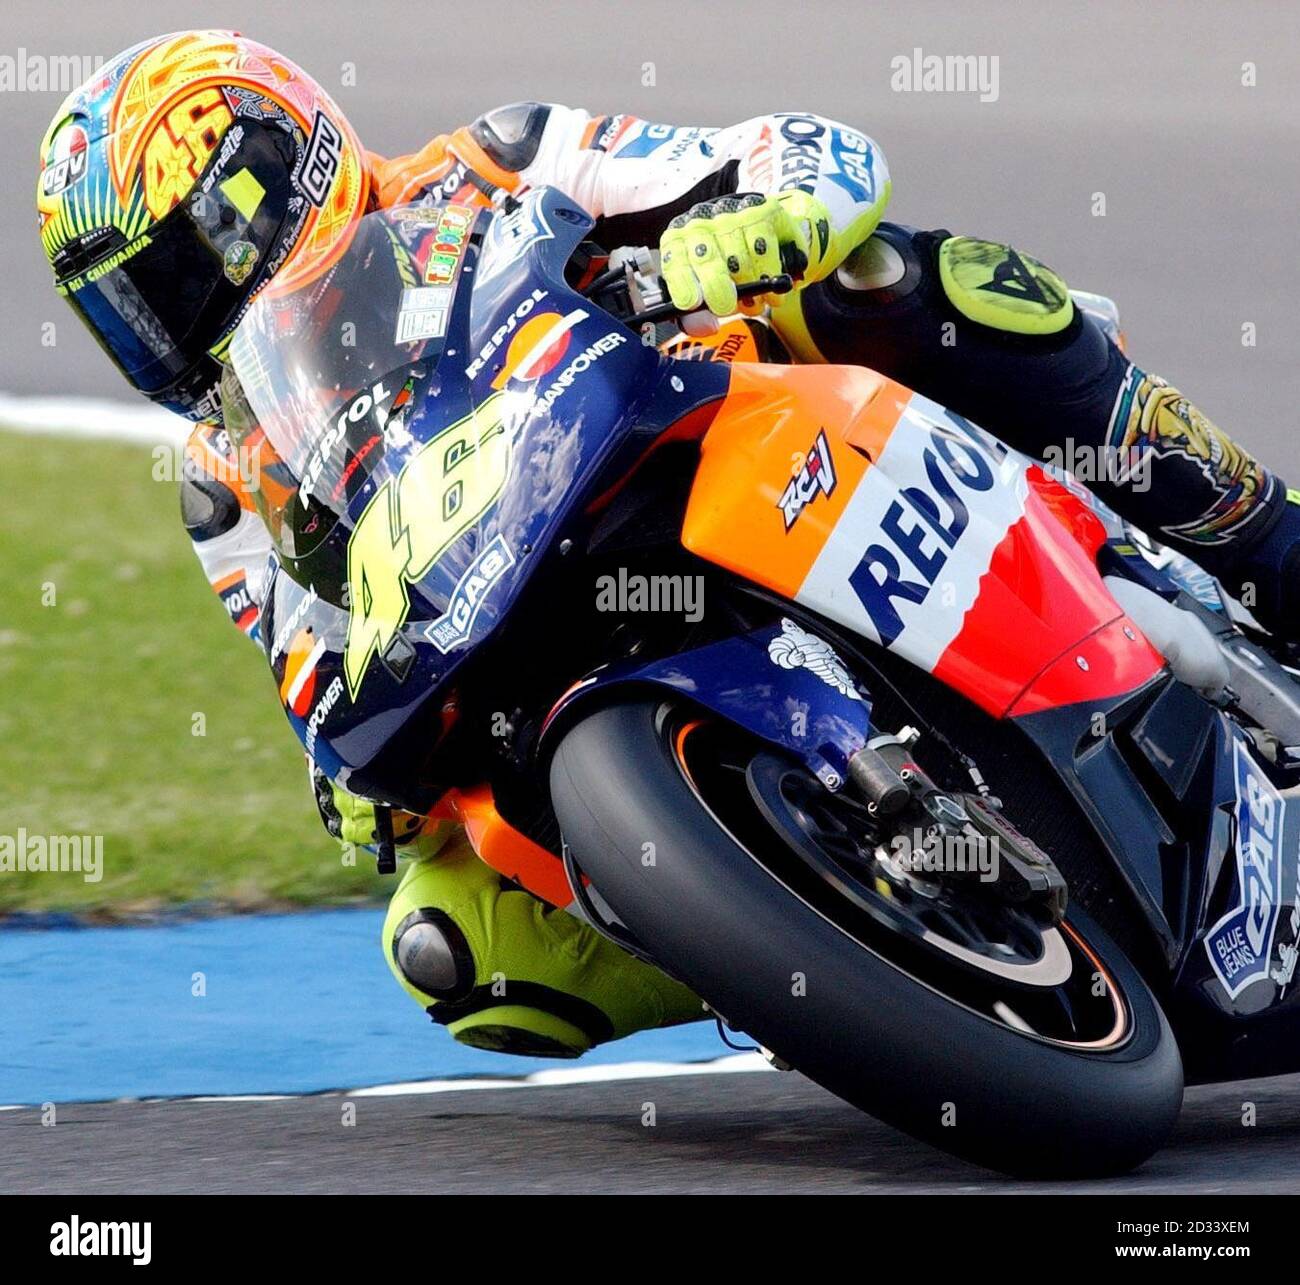 Italy's Valentino Rossi on his Honda, takes a corner during the MotoGP free  practice for The British Motorcycle Grand Prix at Donington, Leicestershire  Stock Photo - Alamy